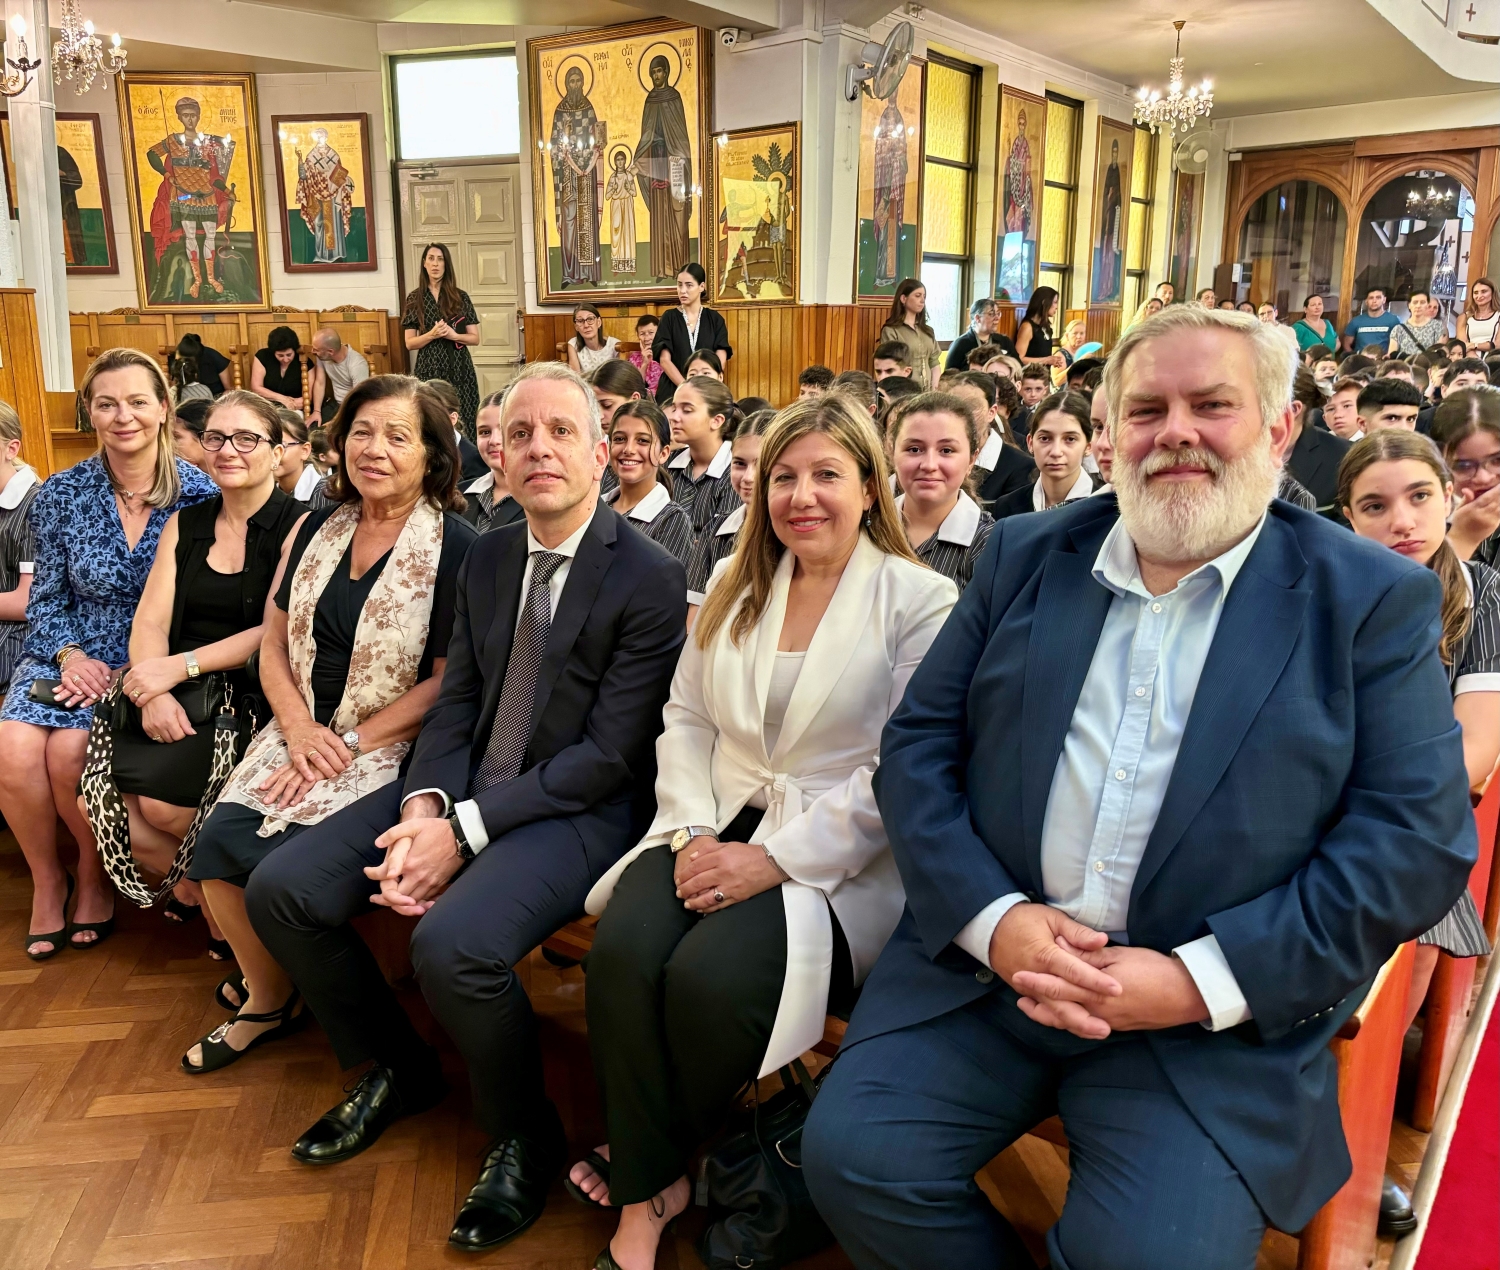 Sydney: Agiasmos Service for the start of the new school year at All Saints Grammar, Belmore